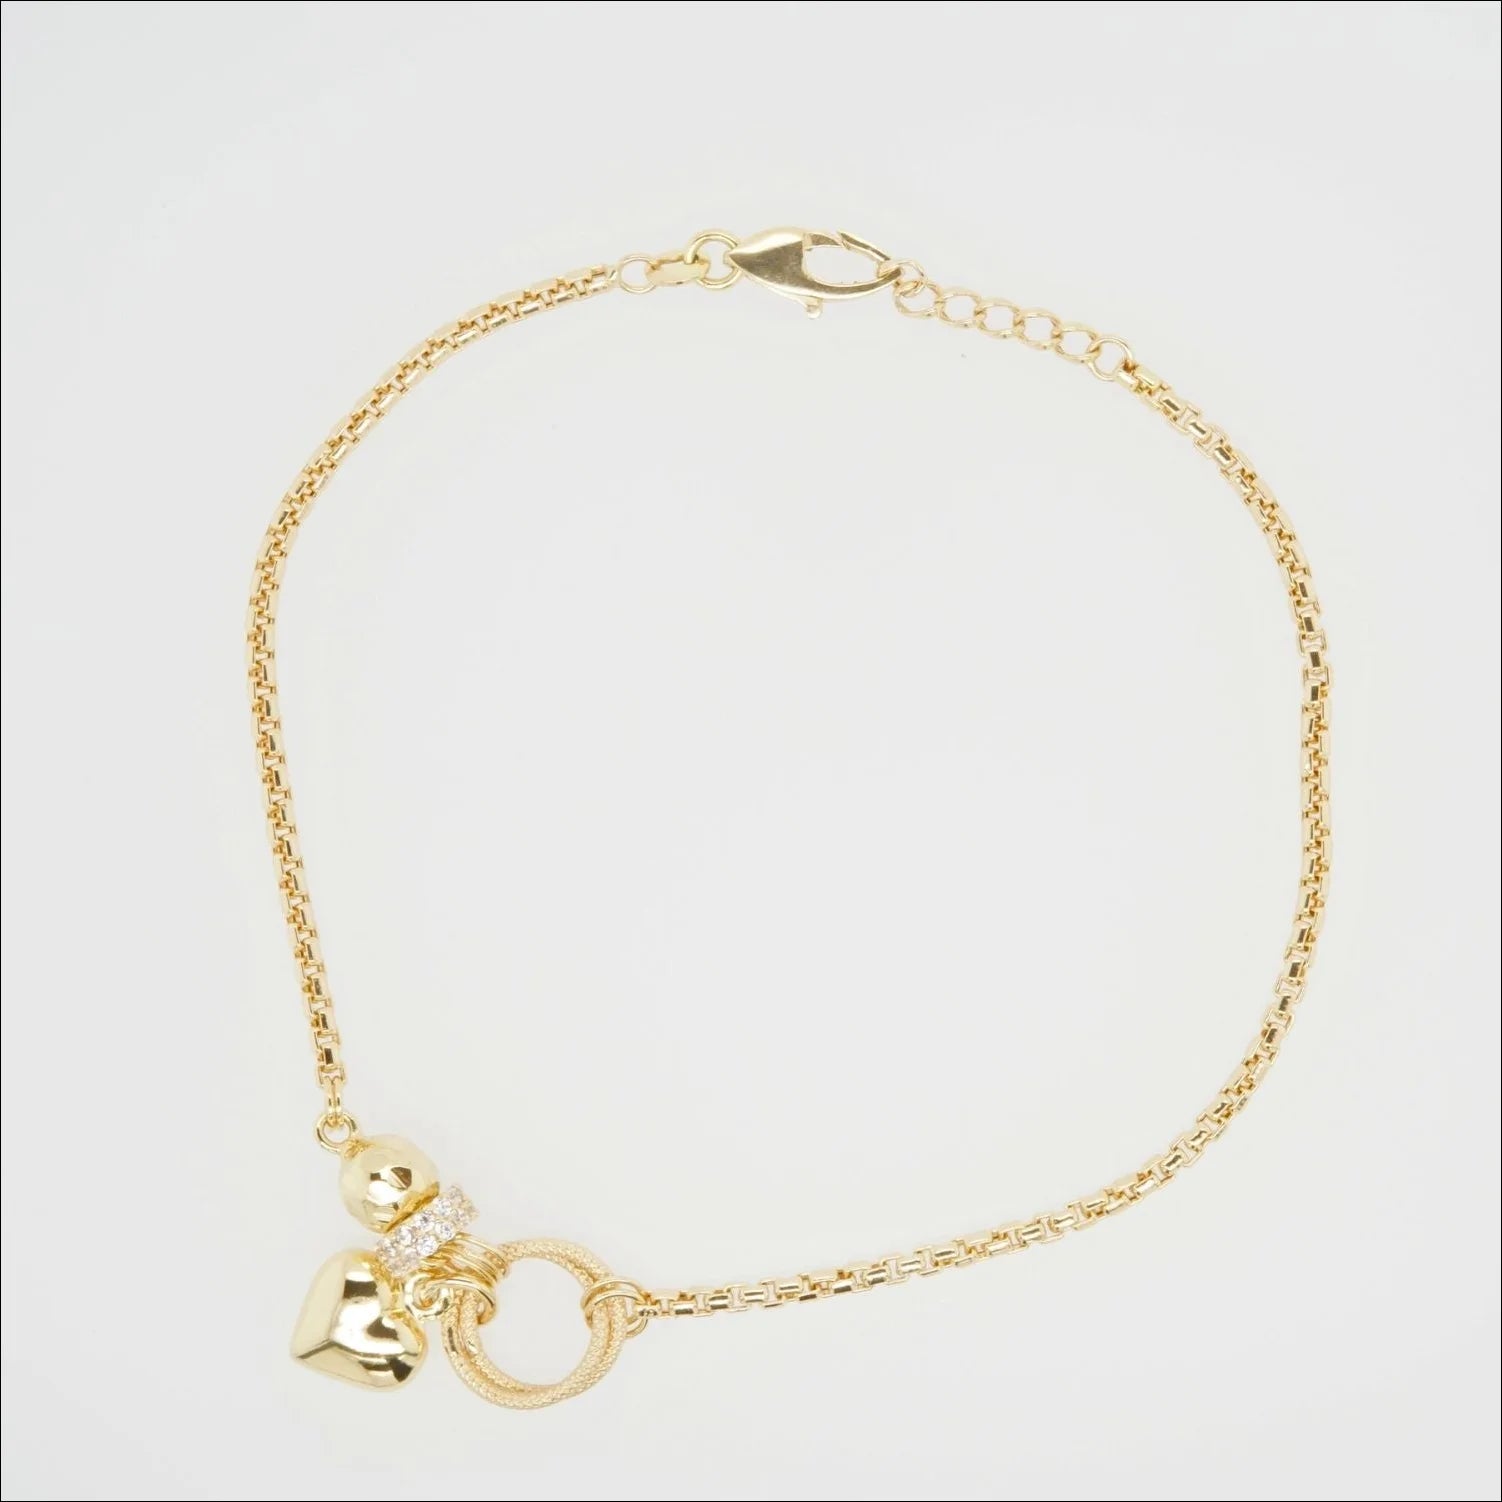 Delicate Charm 18k Gold Bracelet with Zirconia | Home page